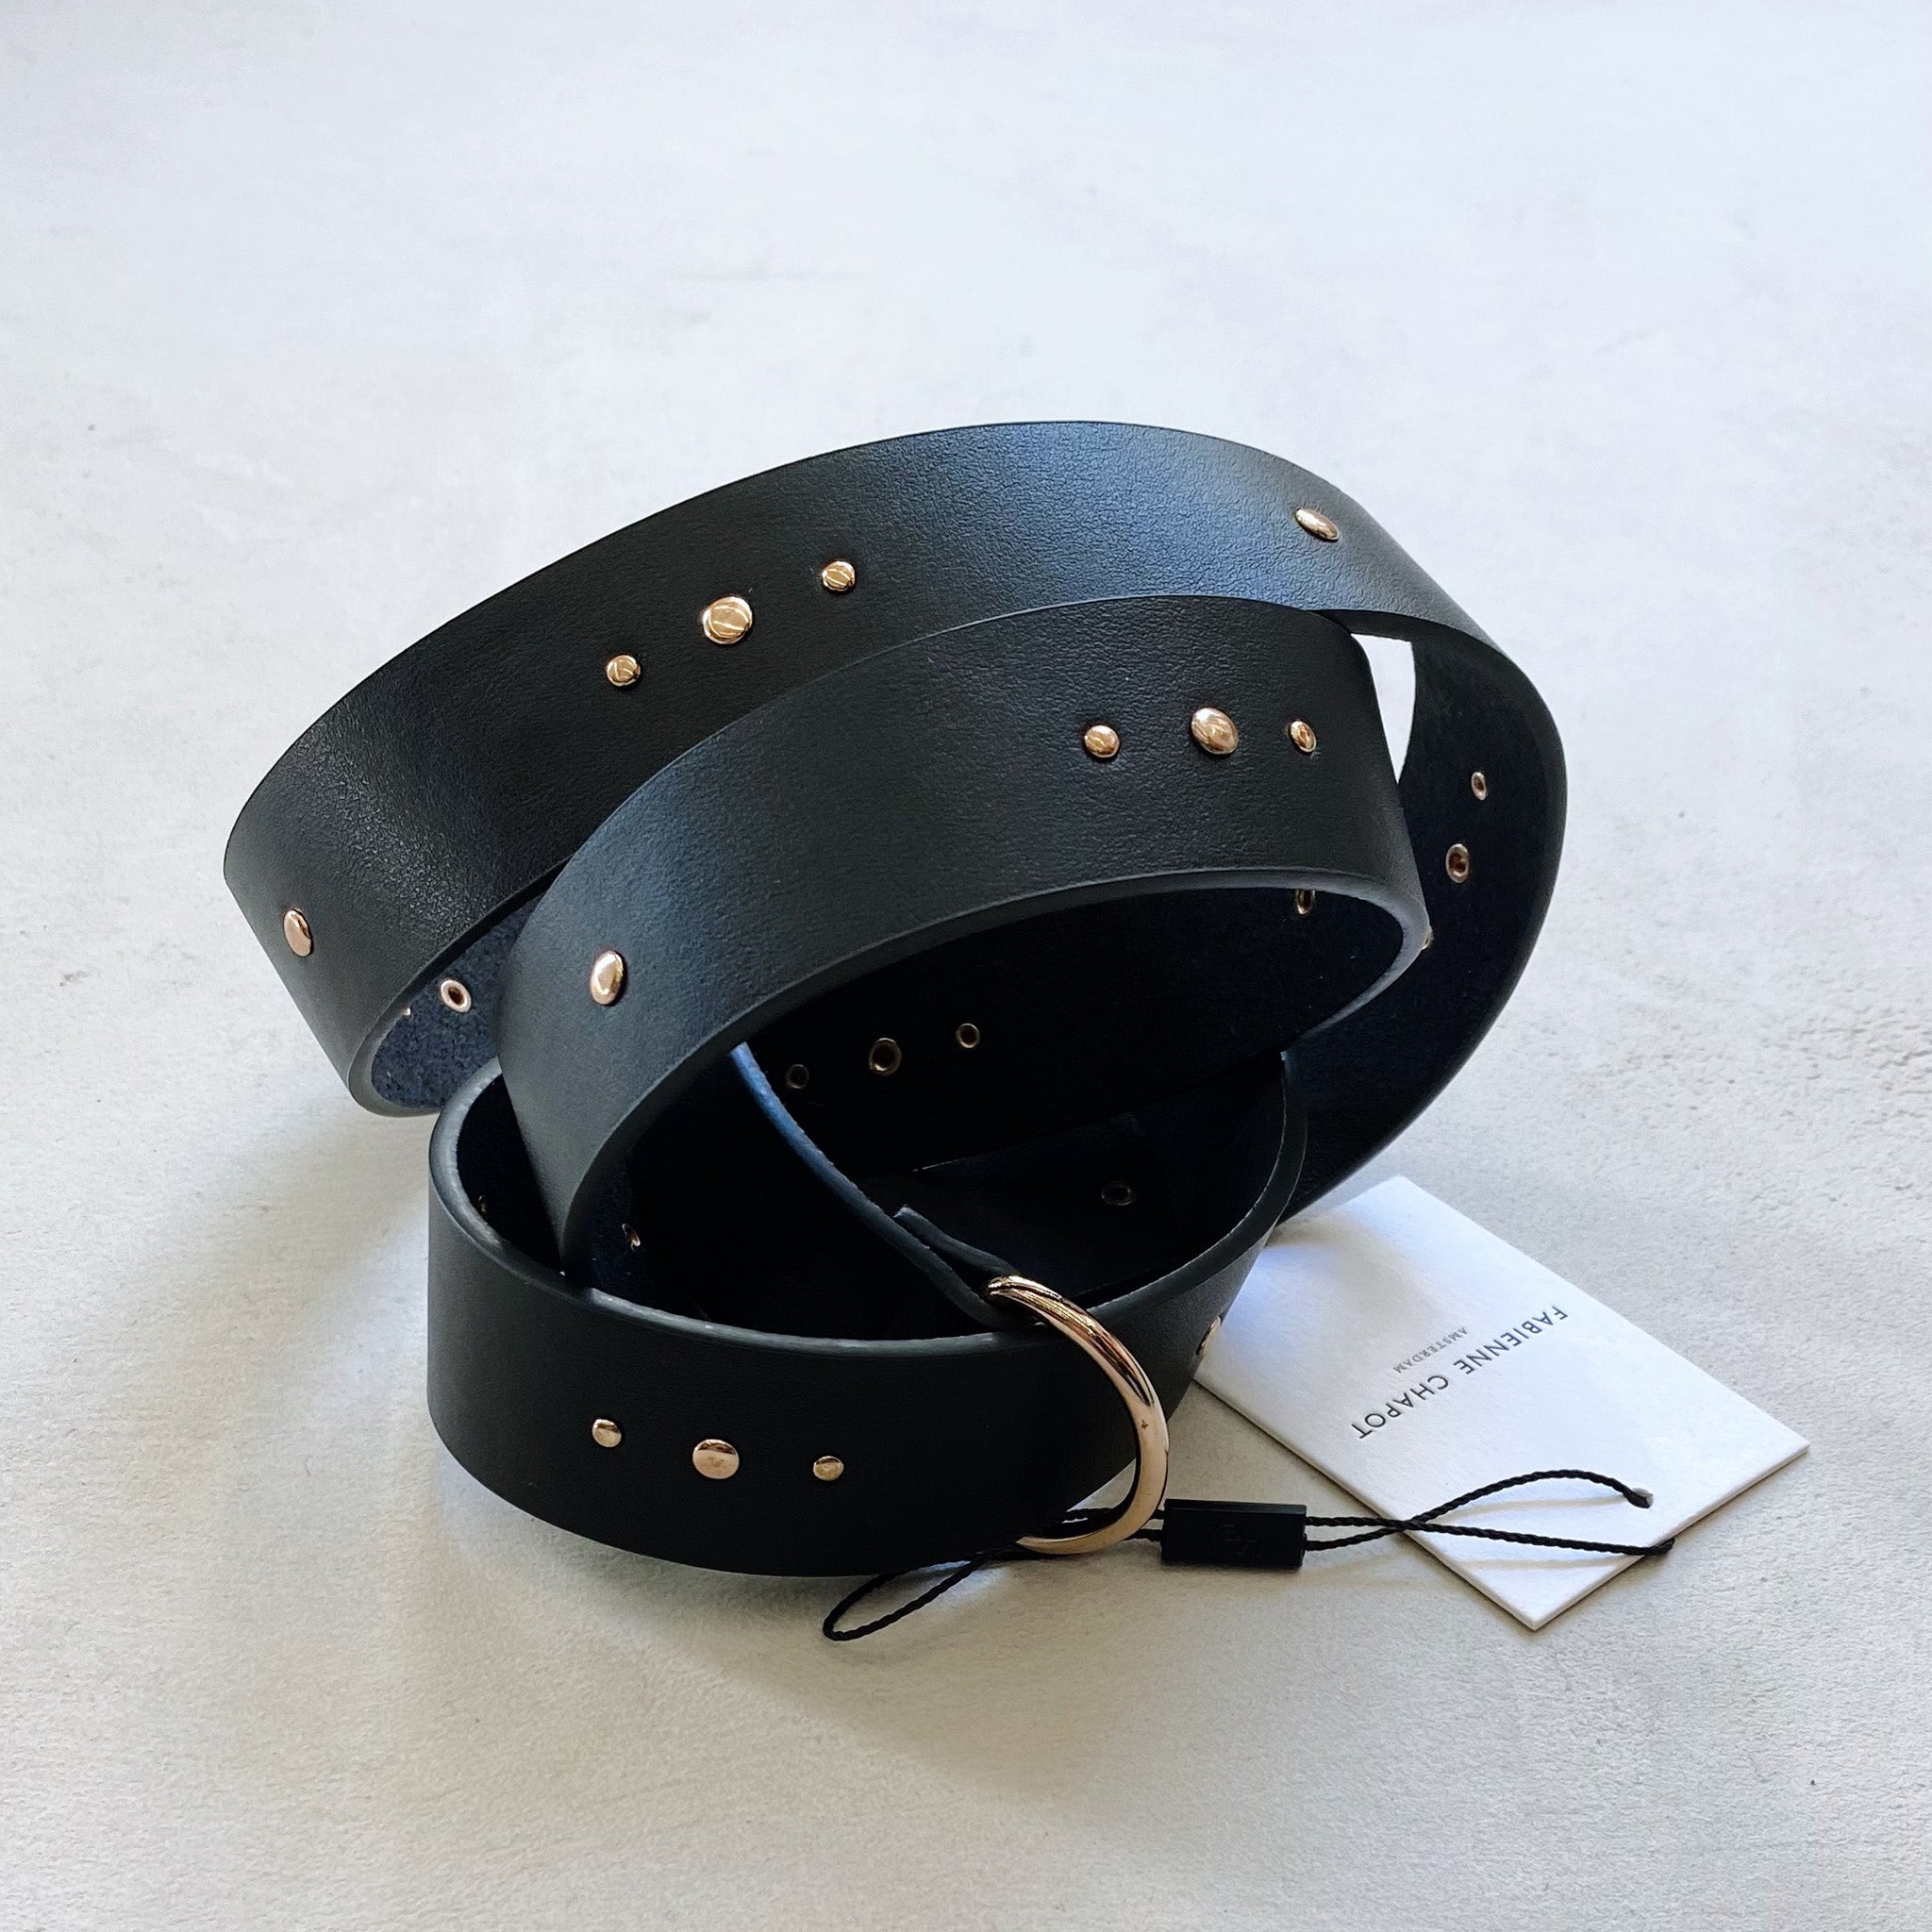 A Fabienne Chapot studded belt - black, adorned with gold studs.